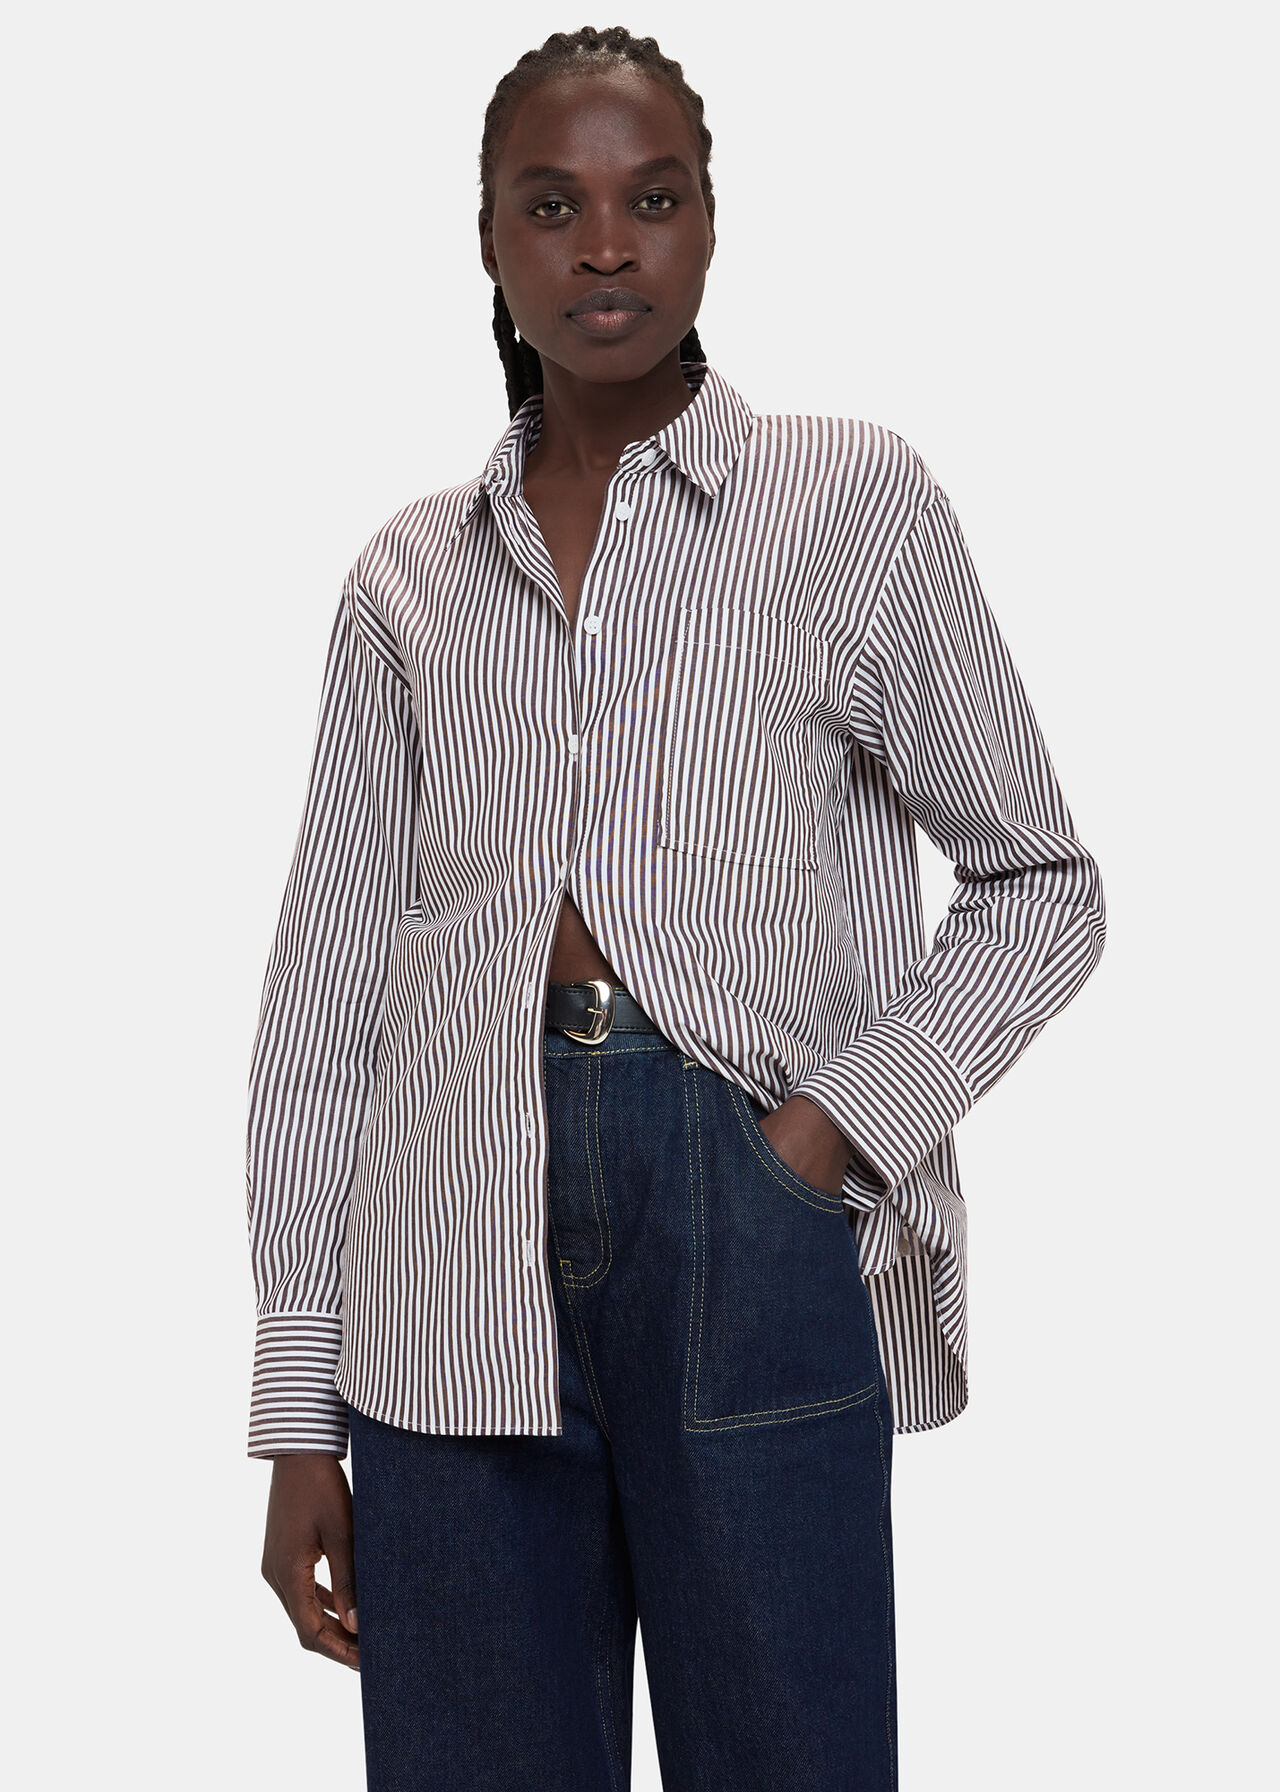 Black & White Striped Shirt | Relaxed Fit | Order Now at Whistles ...